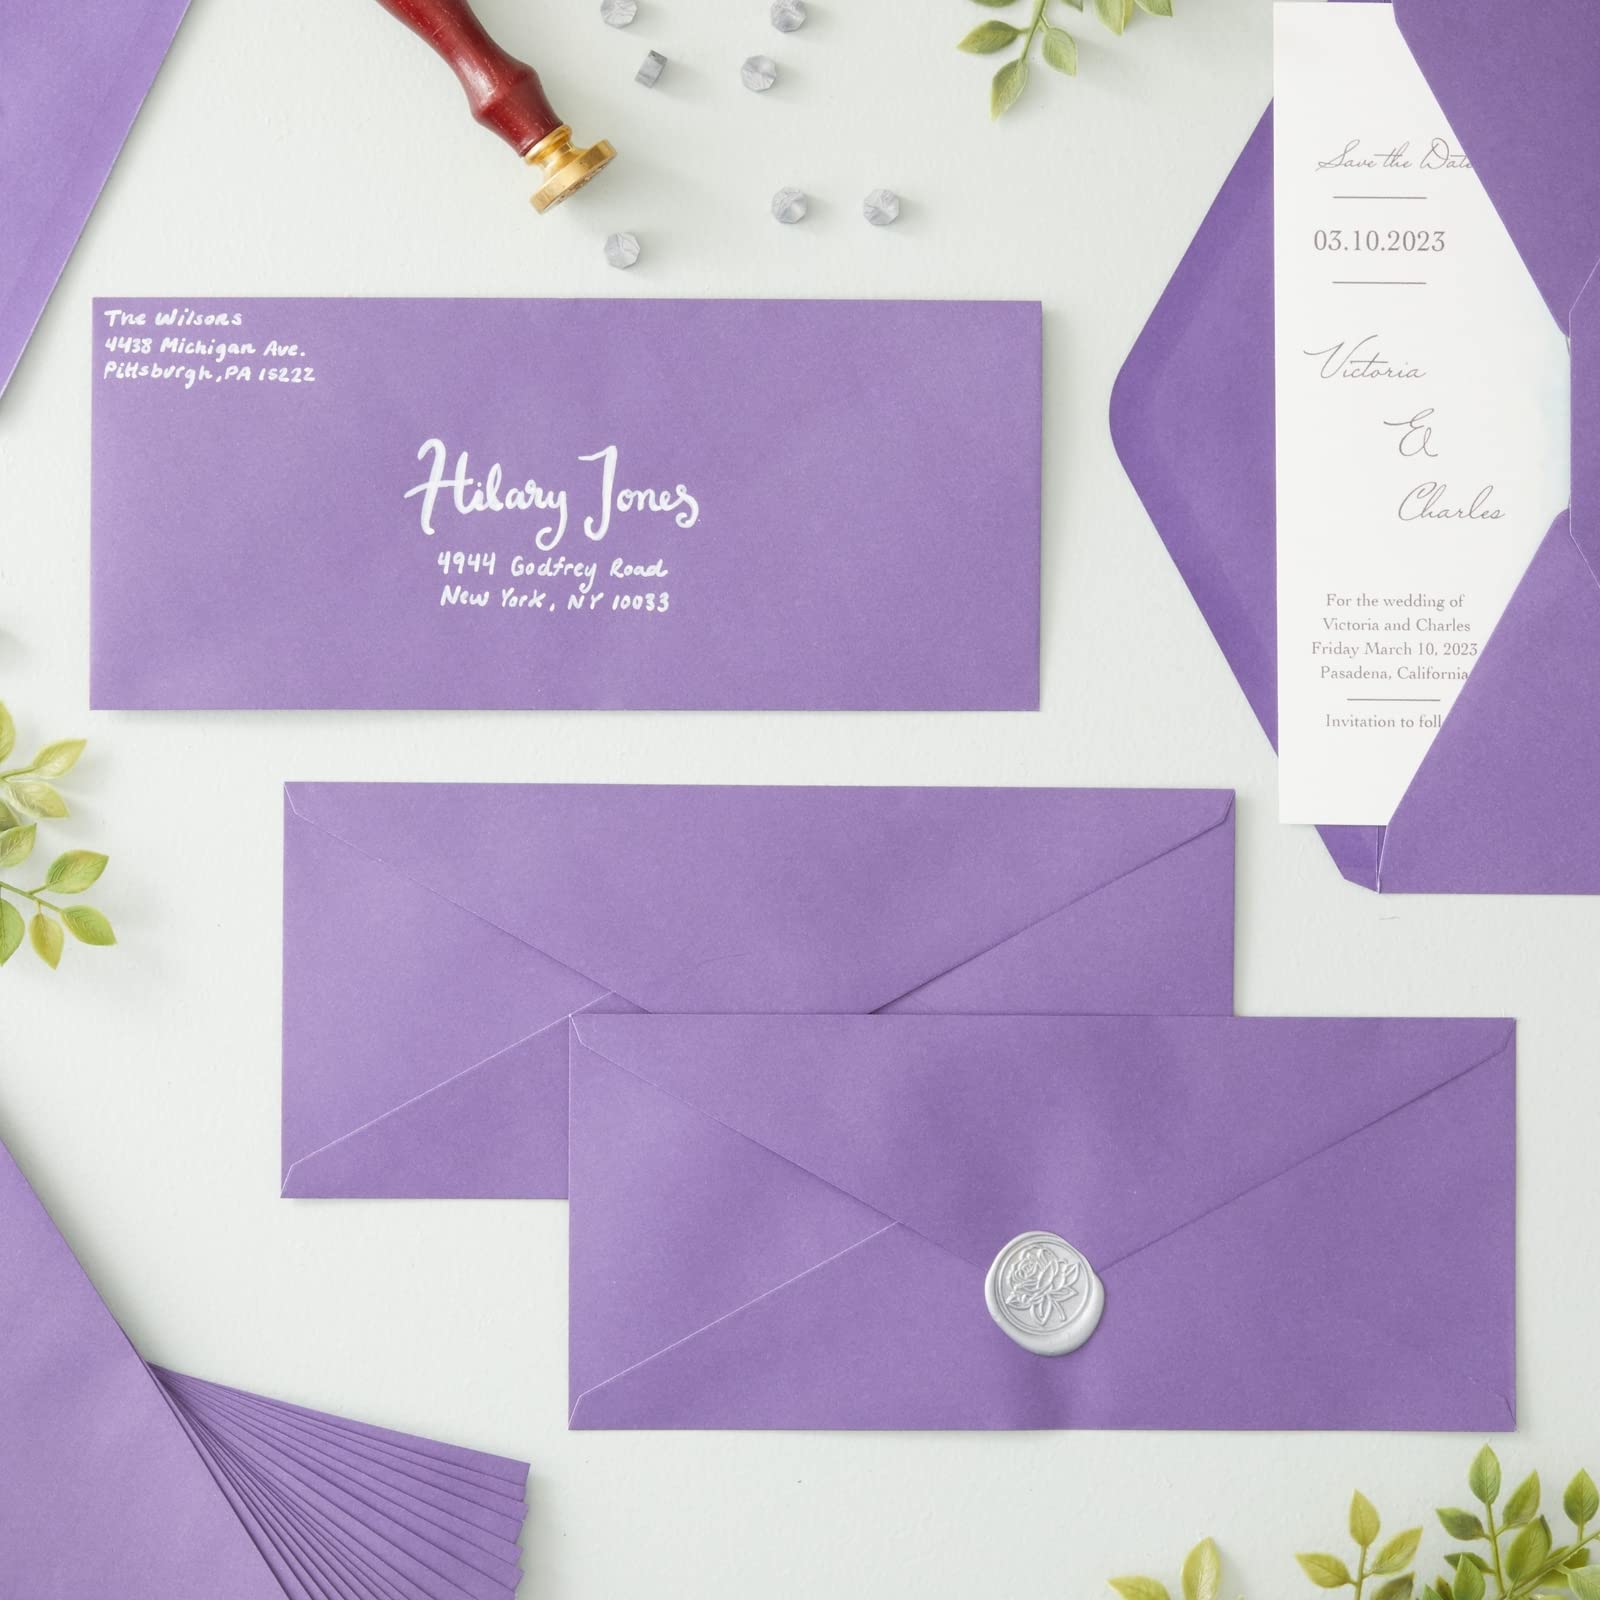 200-Pack #10 Purple Envelopes Bulk with Gummed Seal and V-Flap for Invitations, Mailing Business Letters, Checks, Greeting Cards, Holidays, Notes, and Photos (4 1/8 x 9 1/2 in)